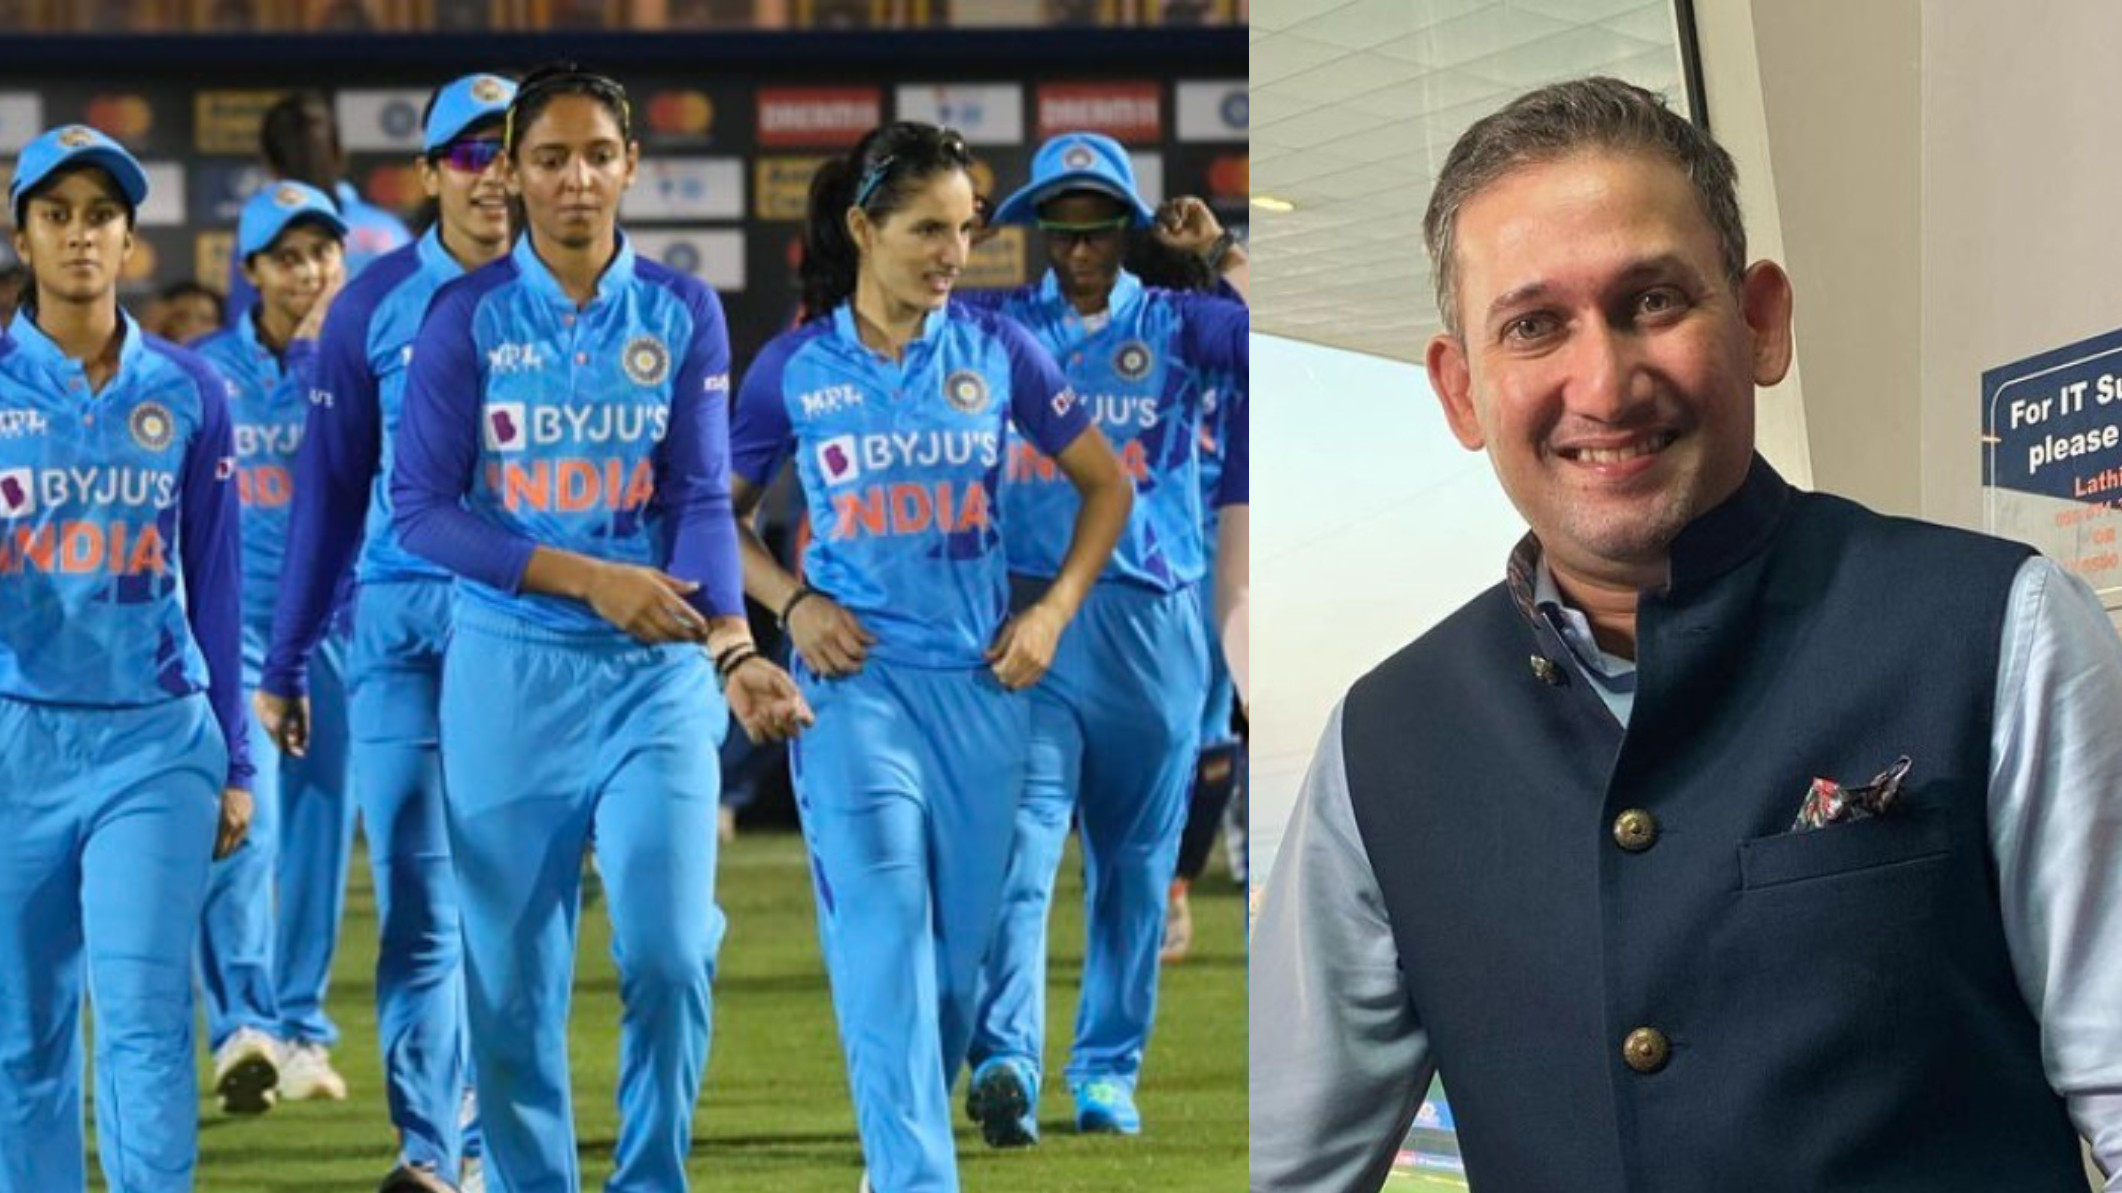 India women's head coach to be named on June 30; Ajit Agarkar primed for Men’s chief selector post- Report